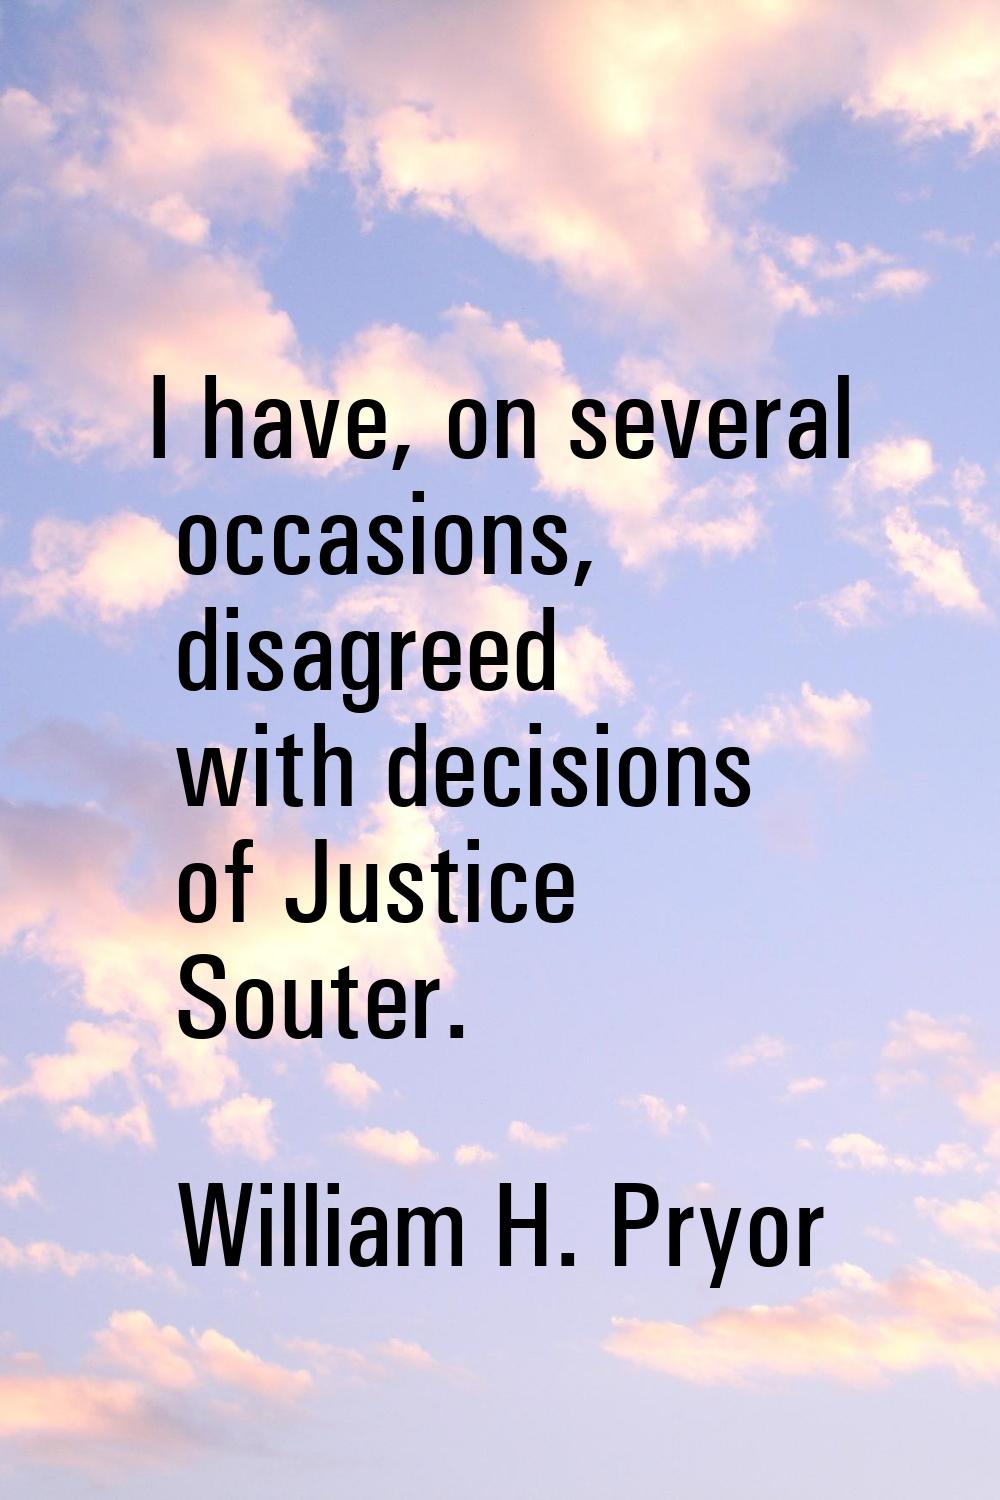 I have, on several occasions, disagreed with decisions of Justice Souter.